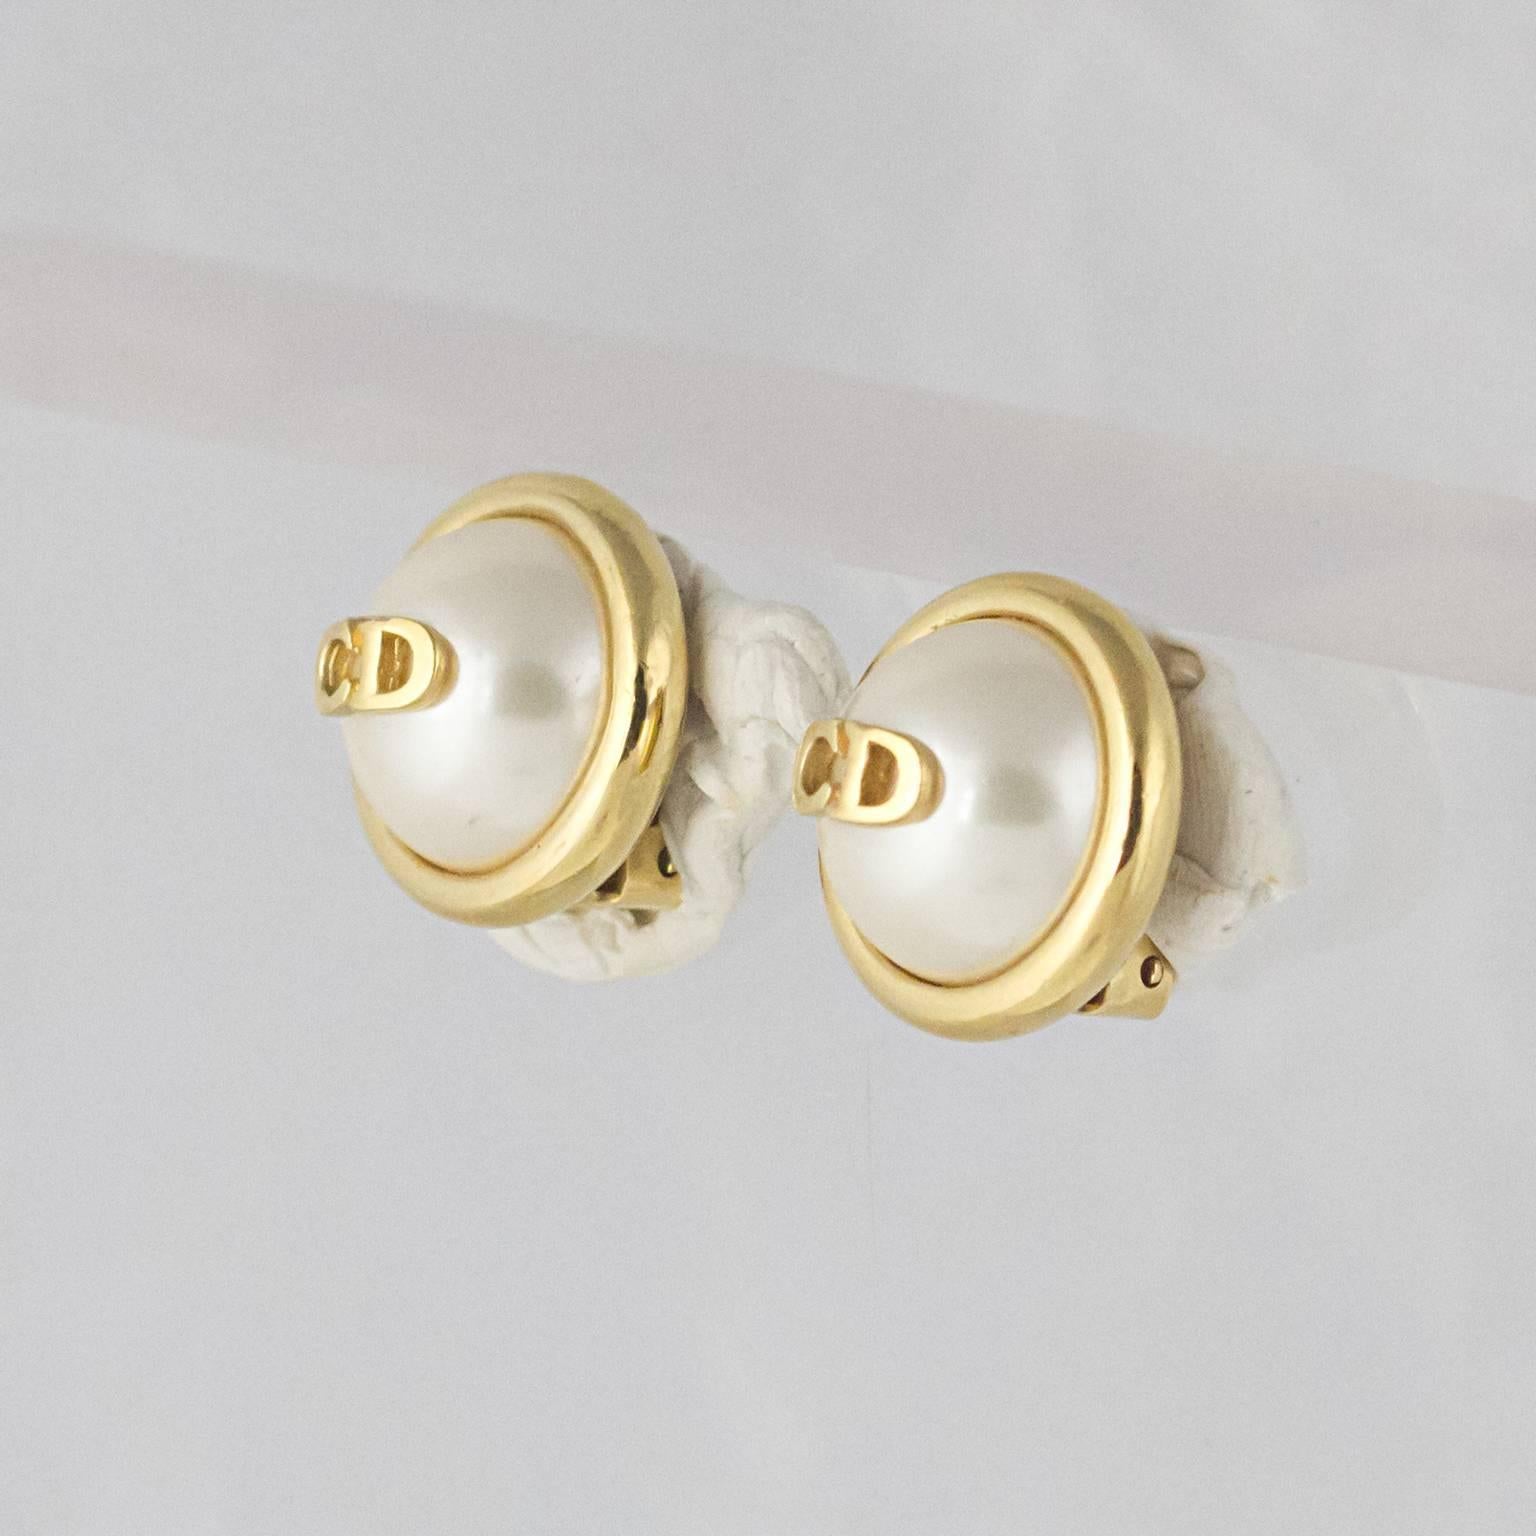 A Pair of Christian Dior 'CD' Faux Pearl Clip-On Earrings. Very Chic!
Made from high carat gold plated metal on faux pearl with comfortable, safe ear clips.
In an excellent vintage condition.